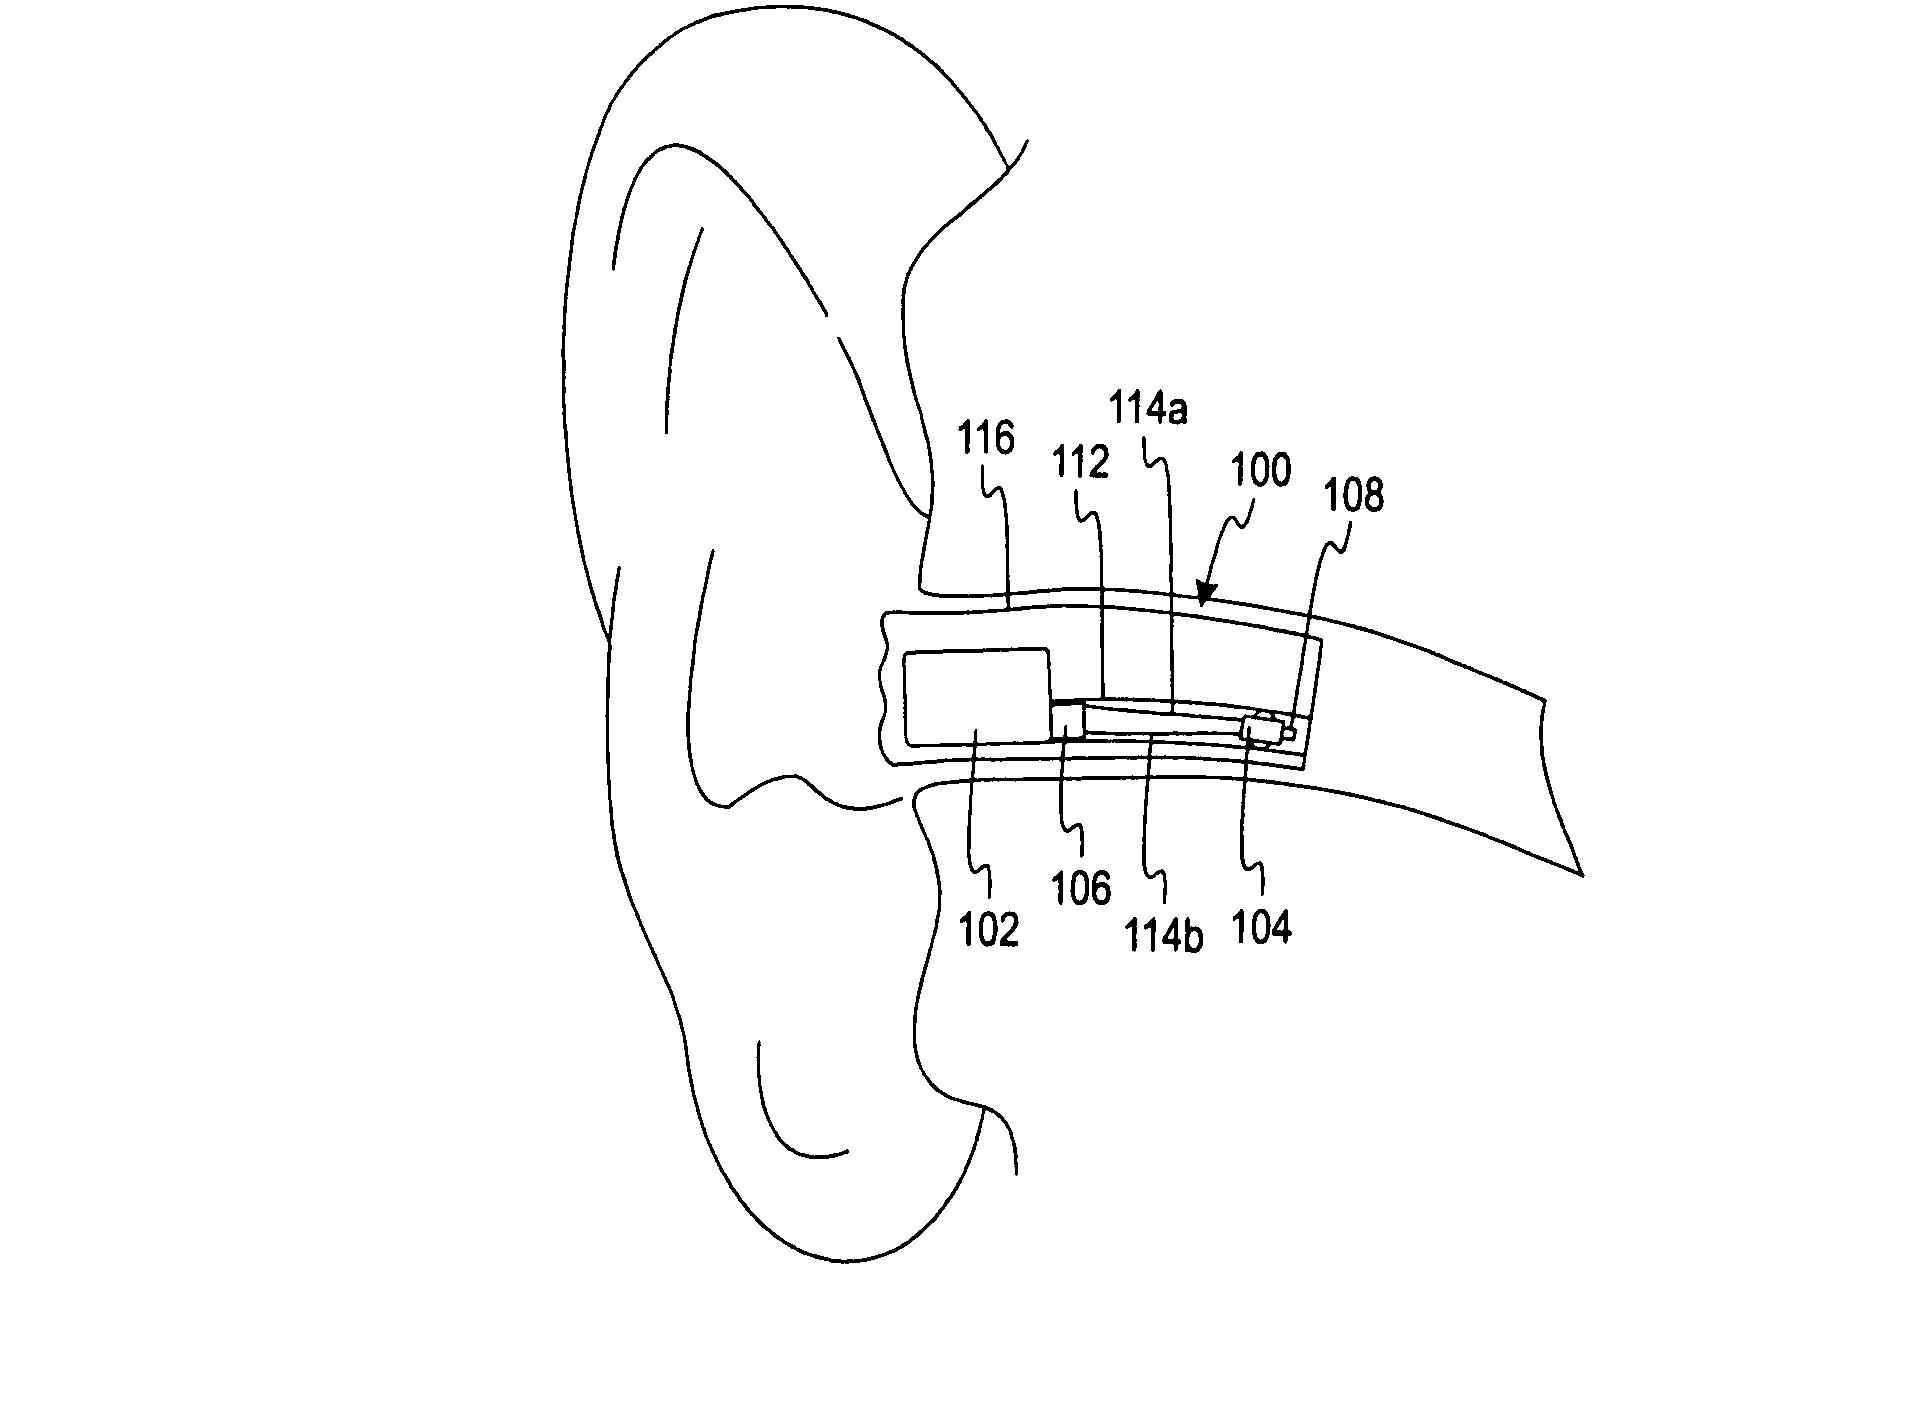 Hearing aid having two receivers each amplifying a different frequency range